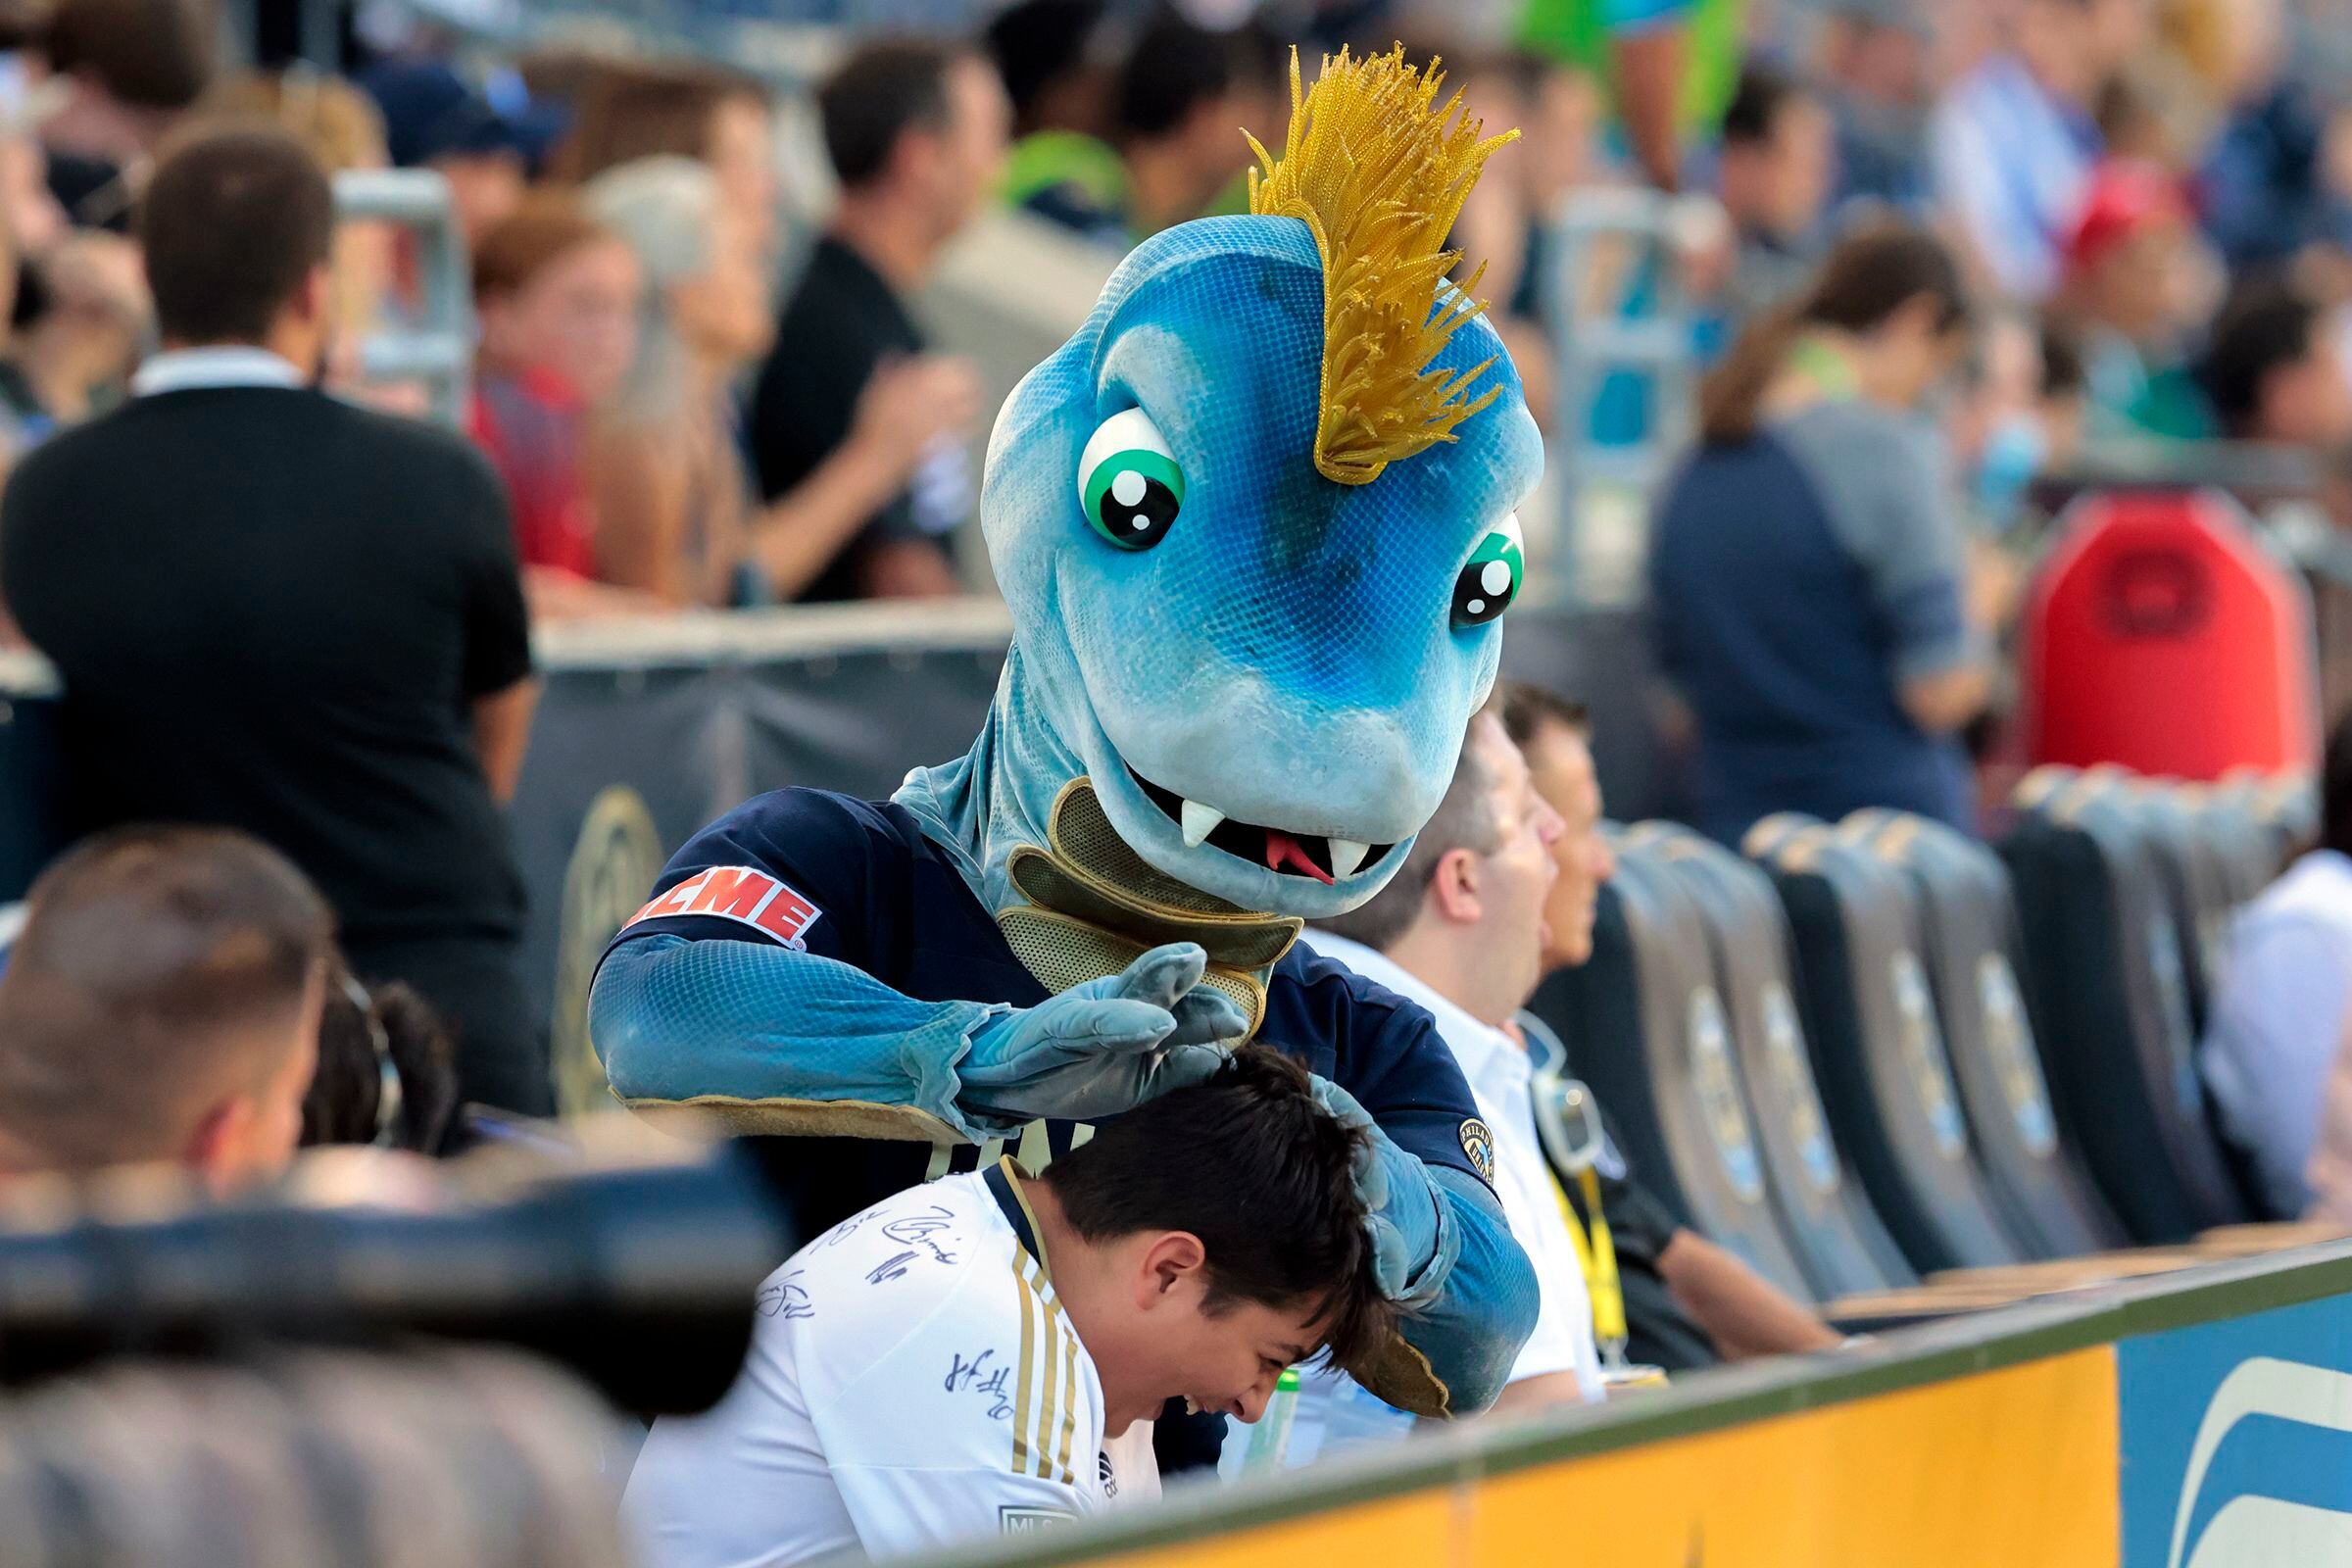 WATCH: The Philadelphia Union unveils its first-ever mascot: A